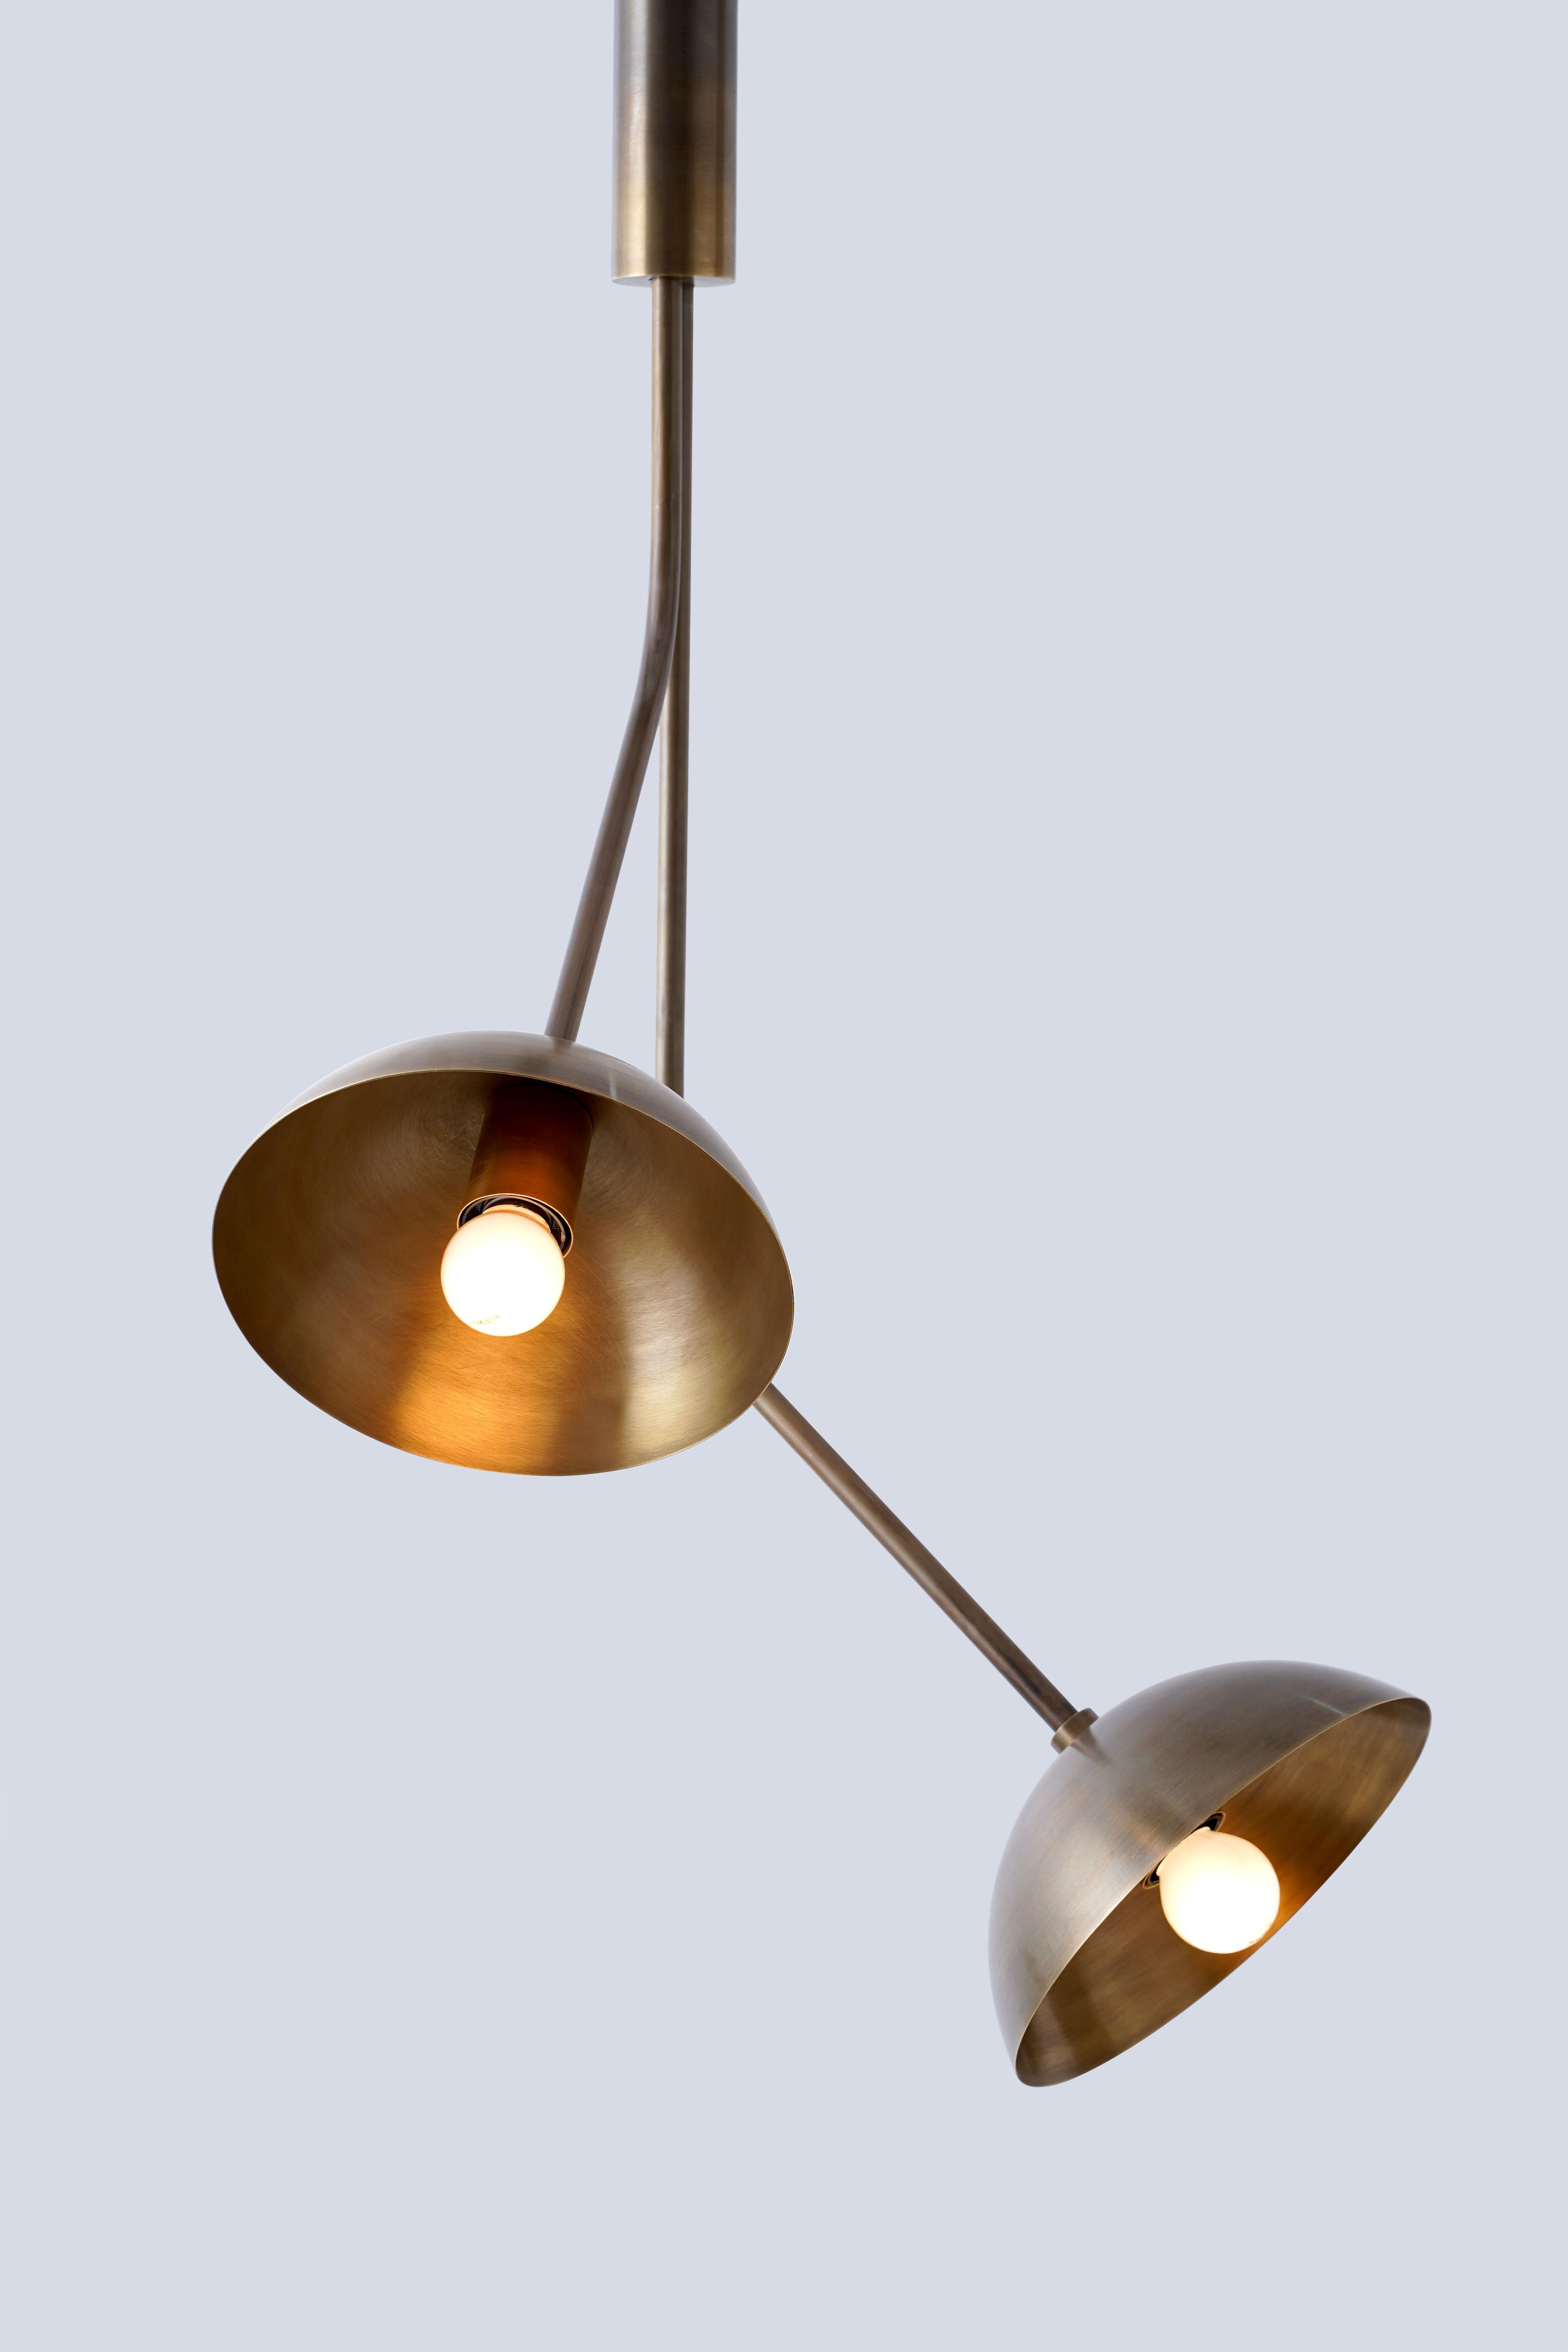 Other Rhythm 2 Brass Dome Pendant Lamp by Lamp Shaper For Sale